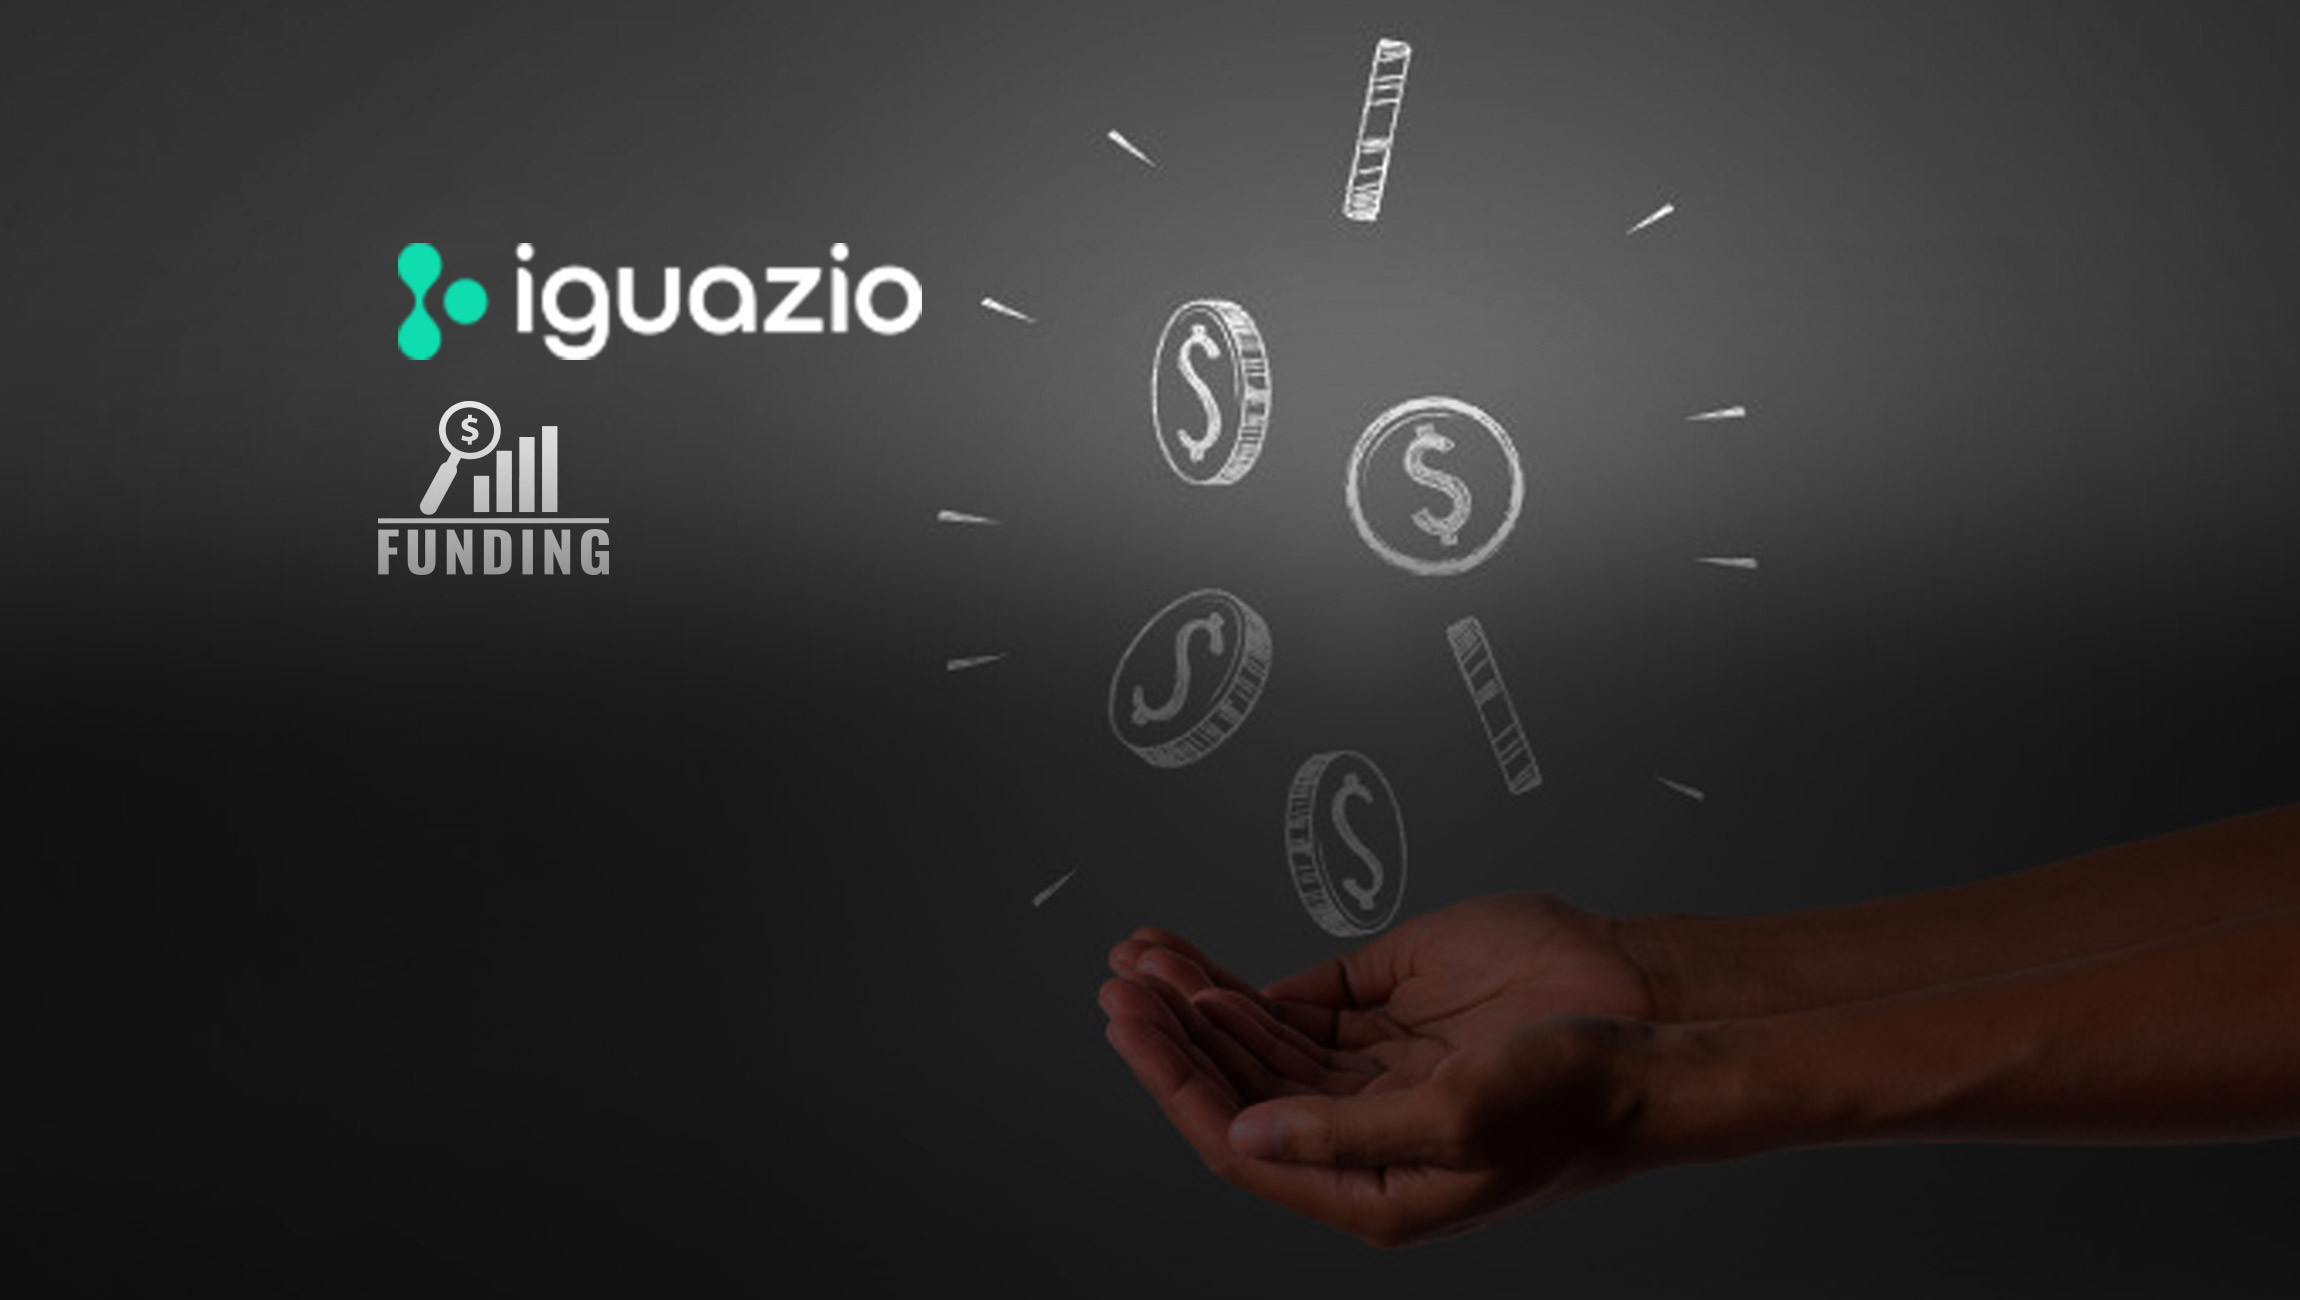 Iguazio Raises $24M to Accelerate Growth and Global Penetration of its Data Science Platform